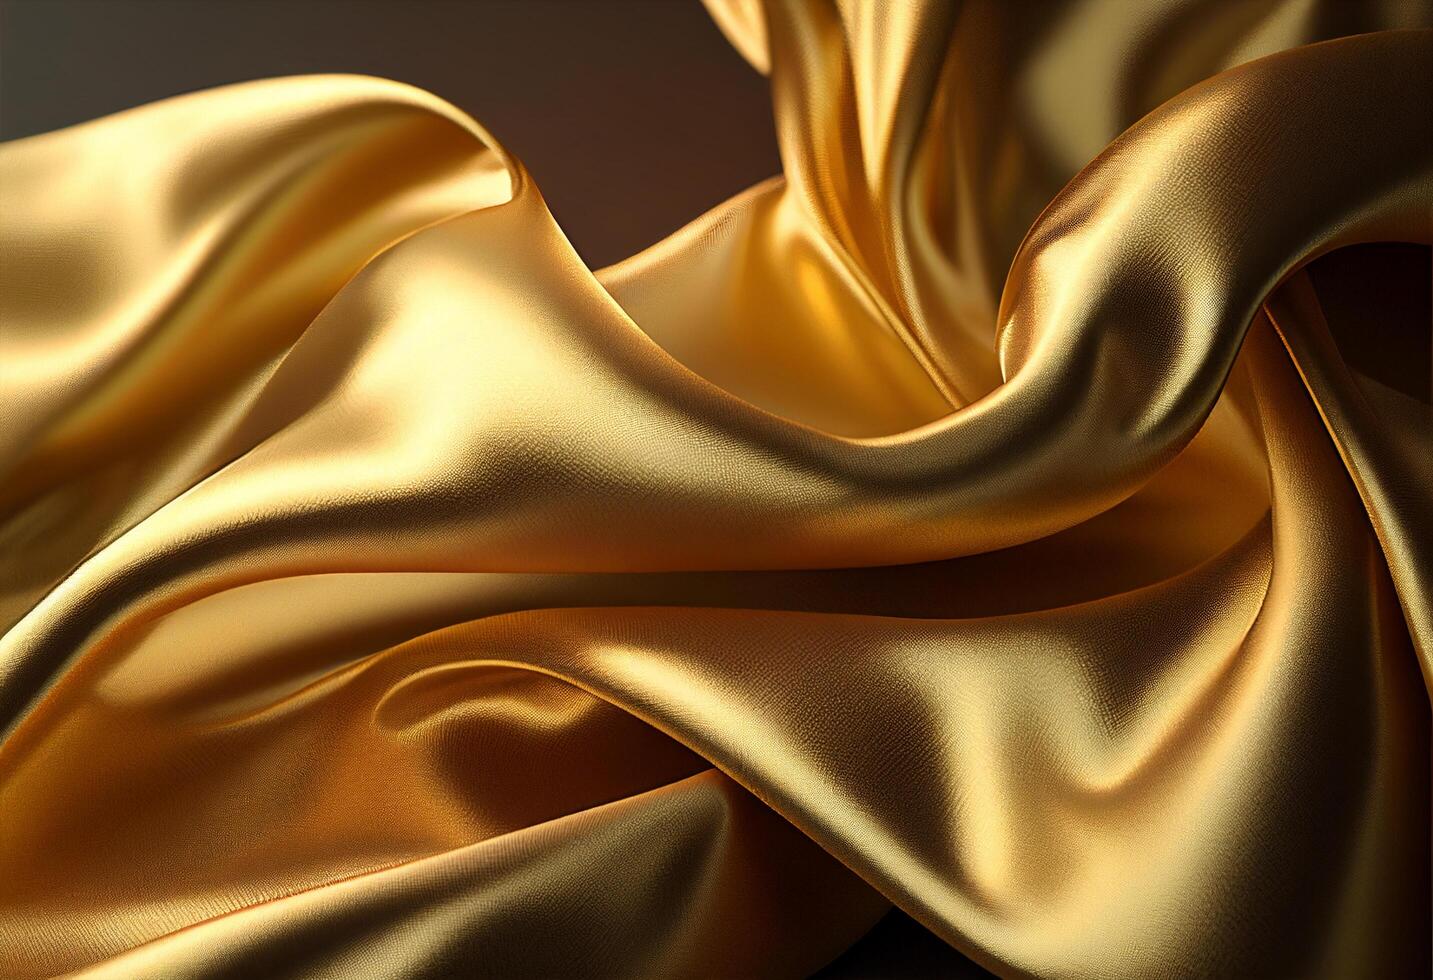 Golden satin background with some smooth lines in it 3d render photo